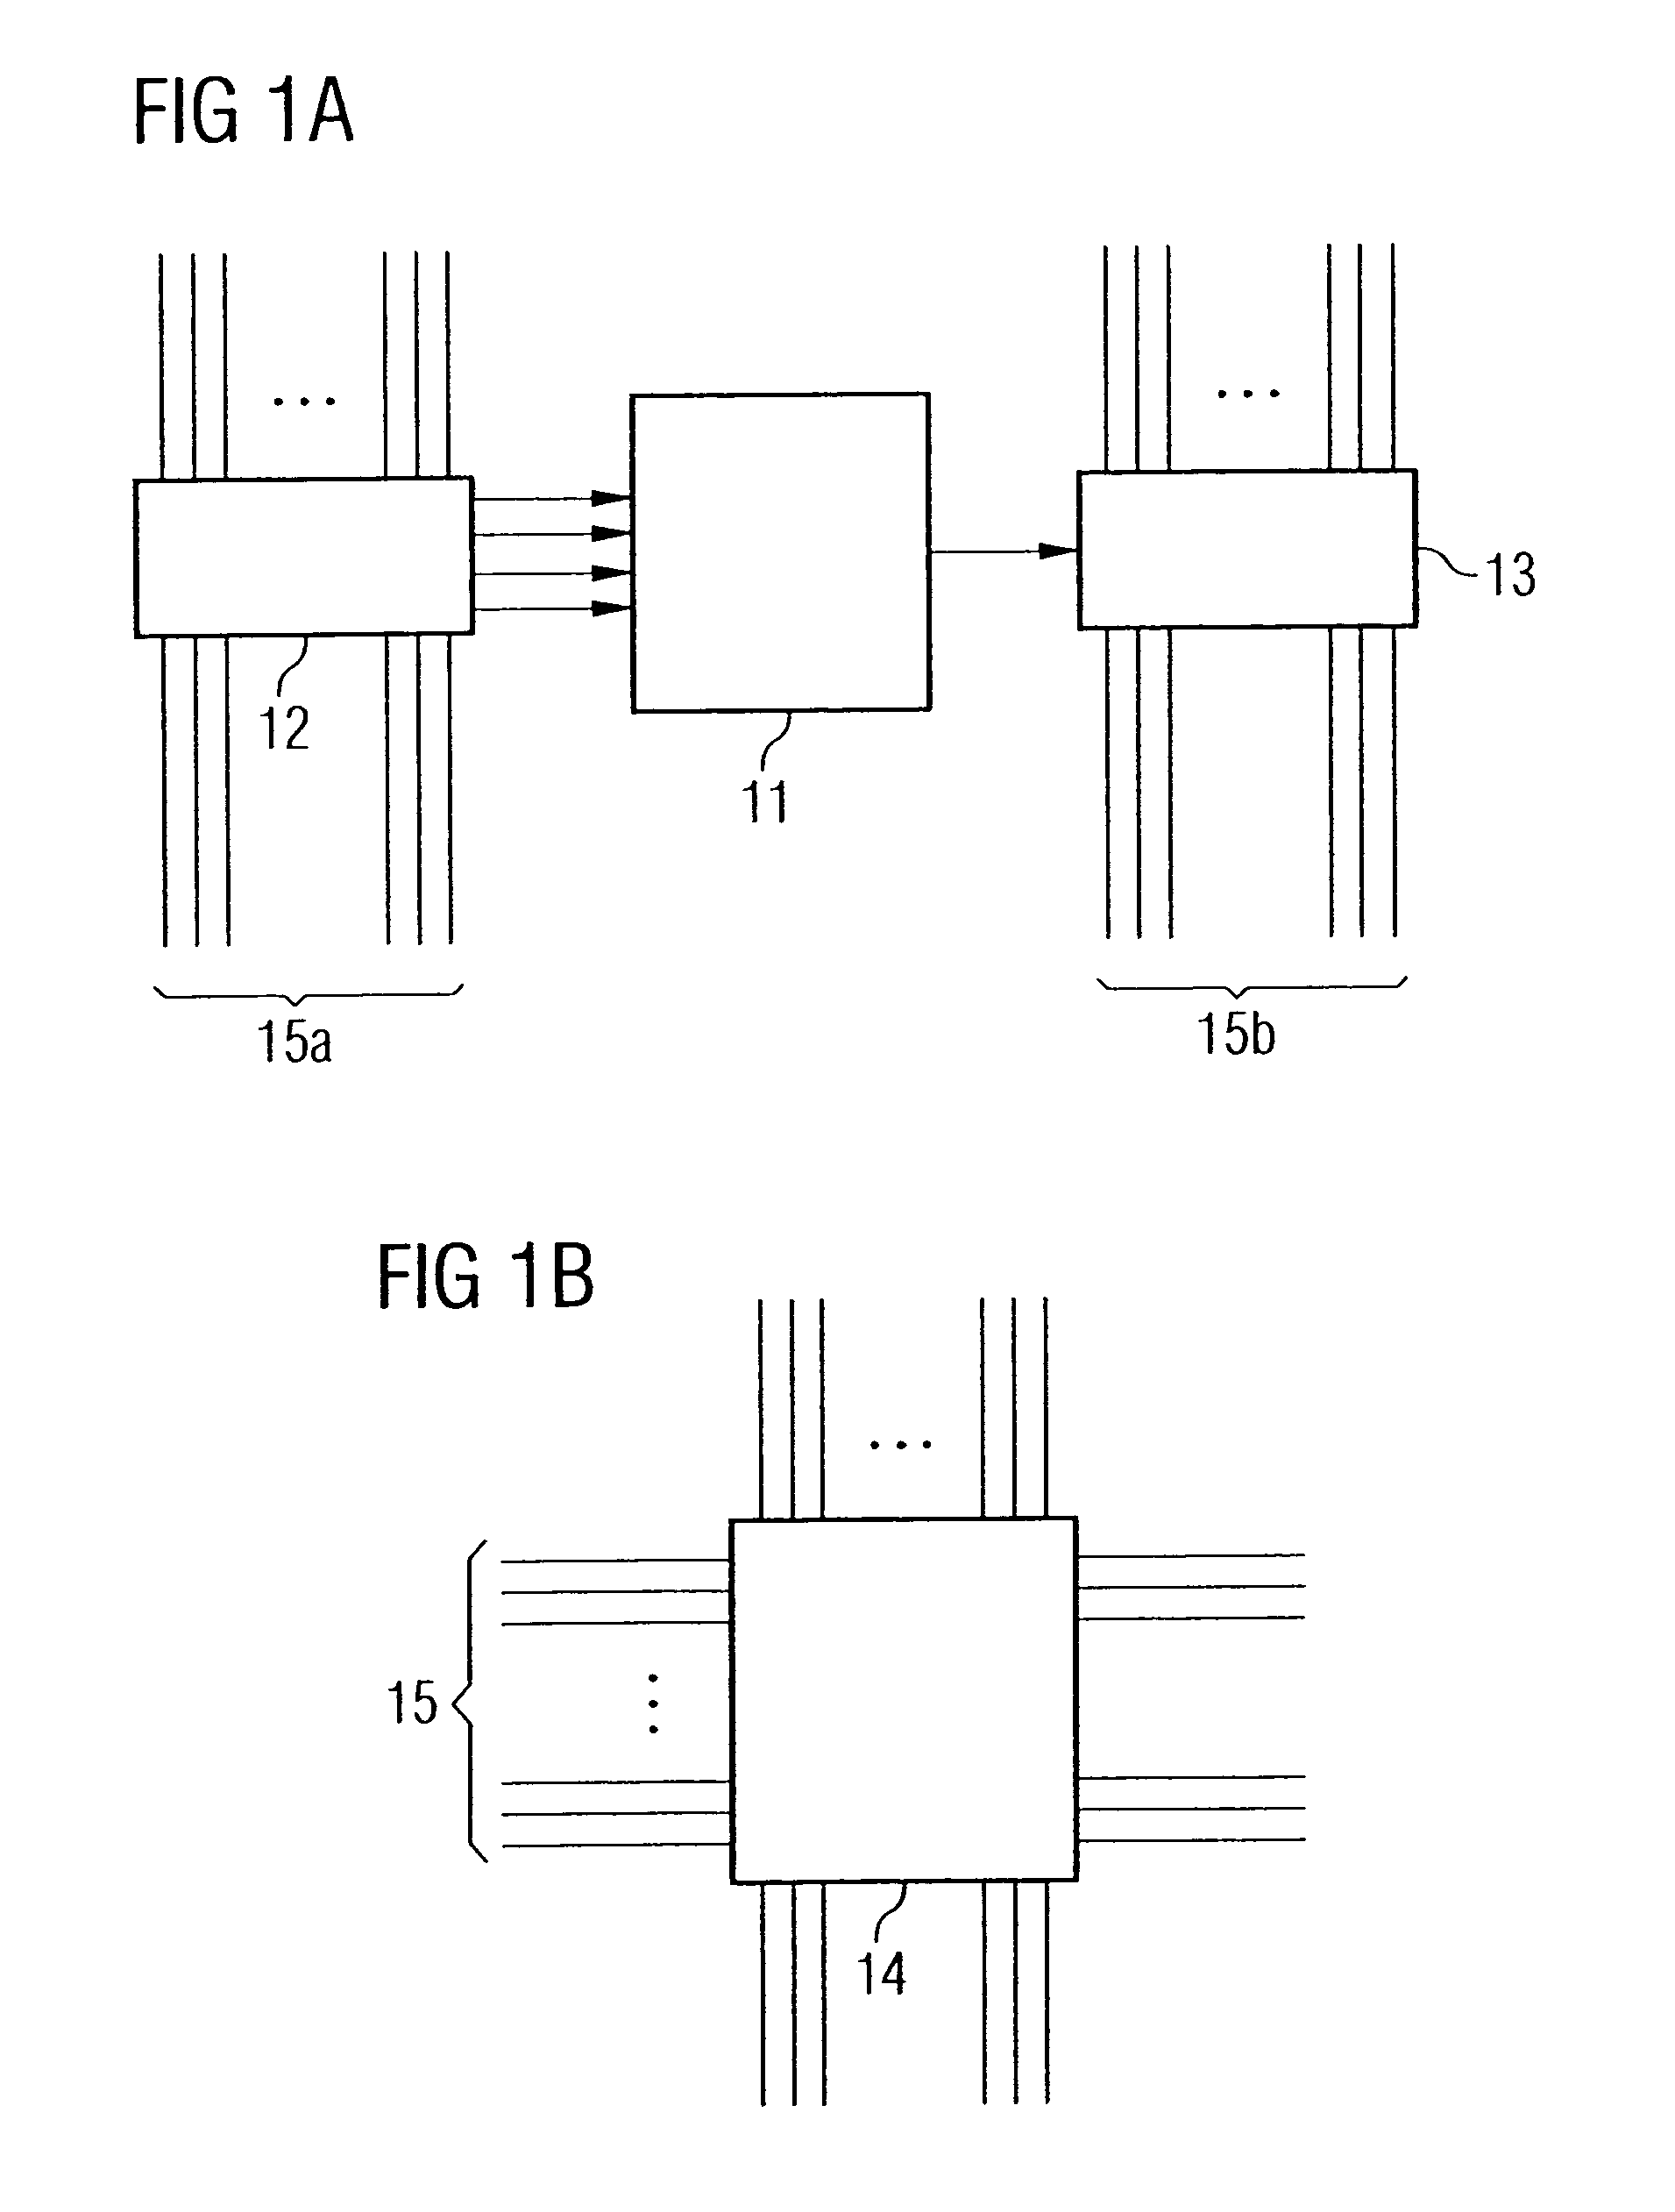 Configurable logic component without a local configuration memory and with a parallel configuration bus